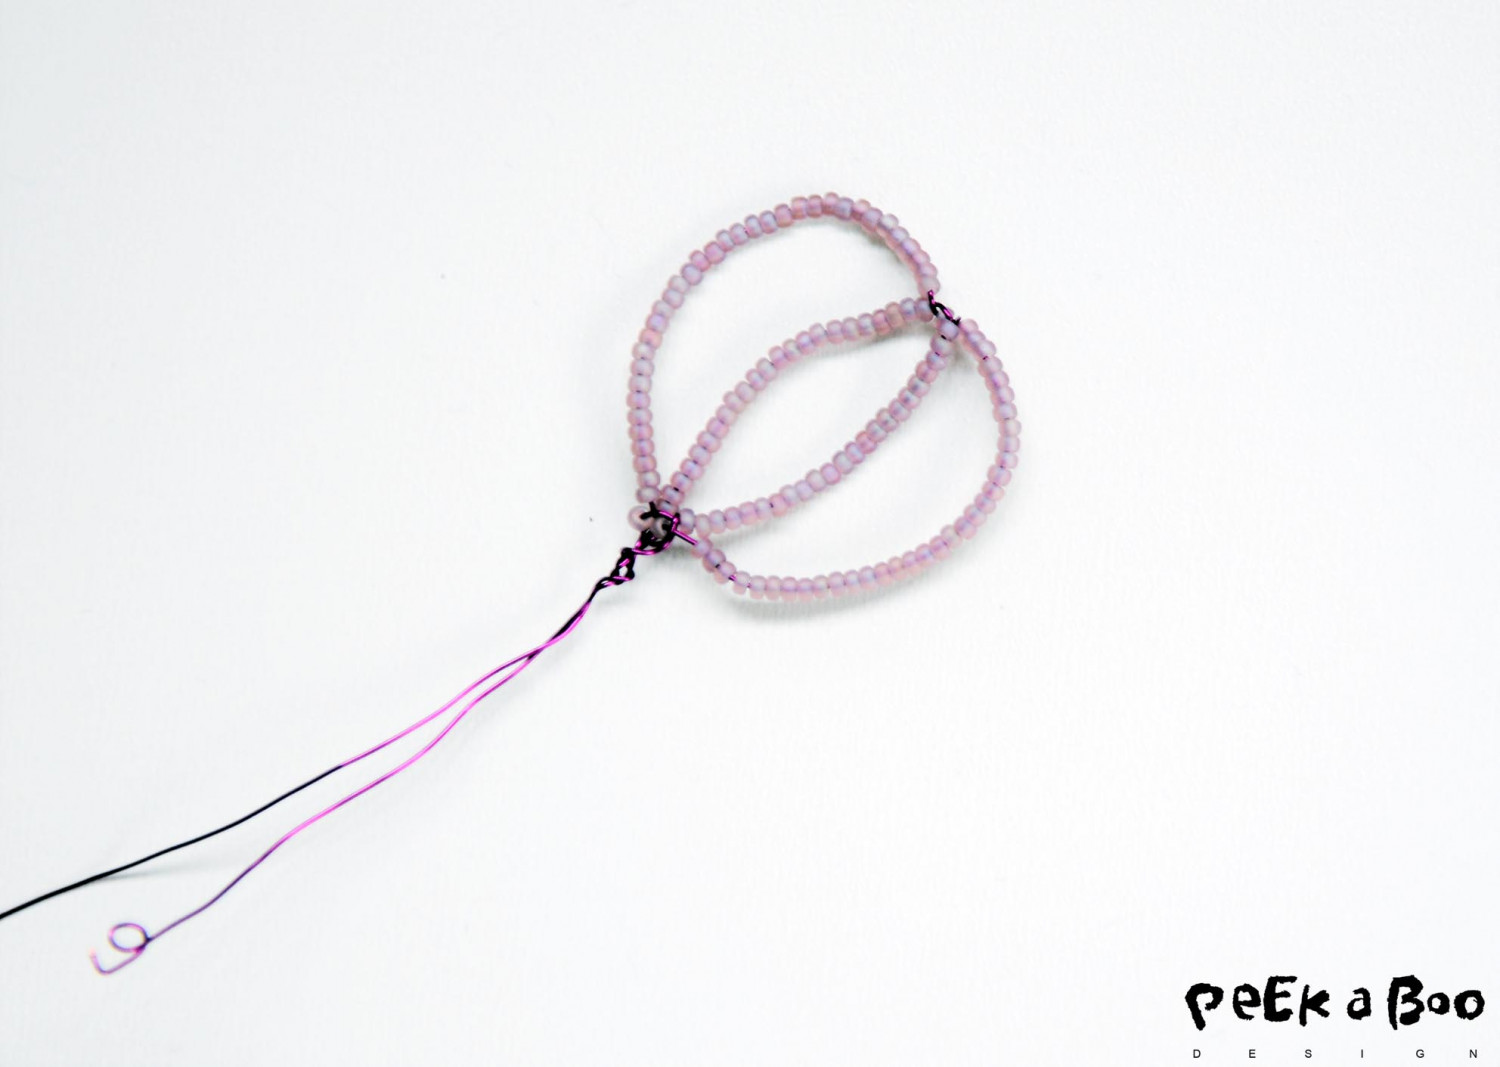 Now you add more wire with beads in the middle of the petal.